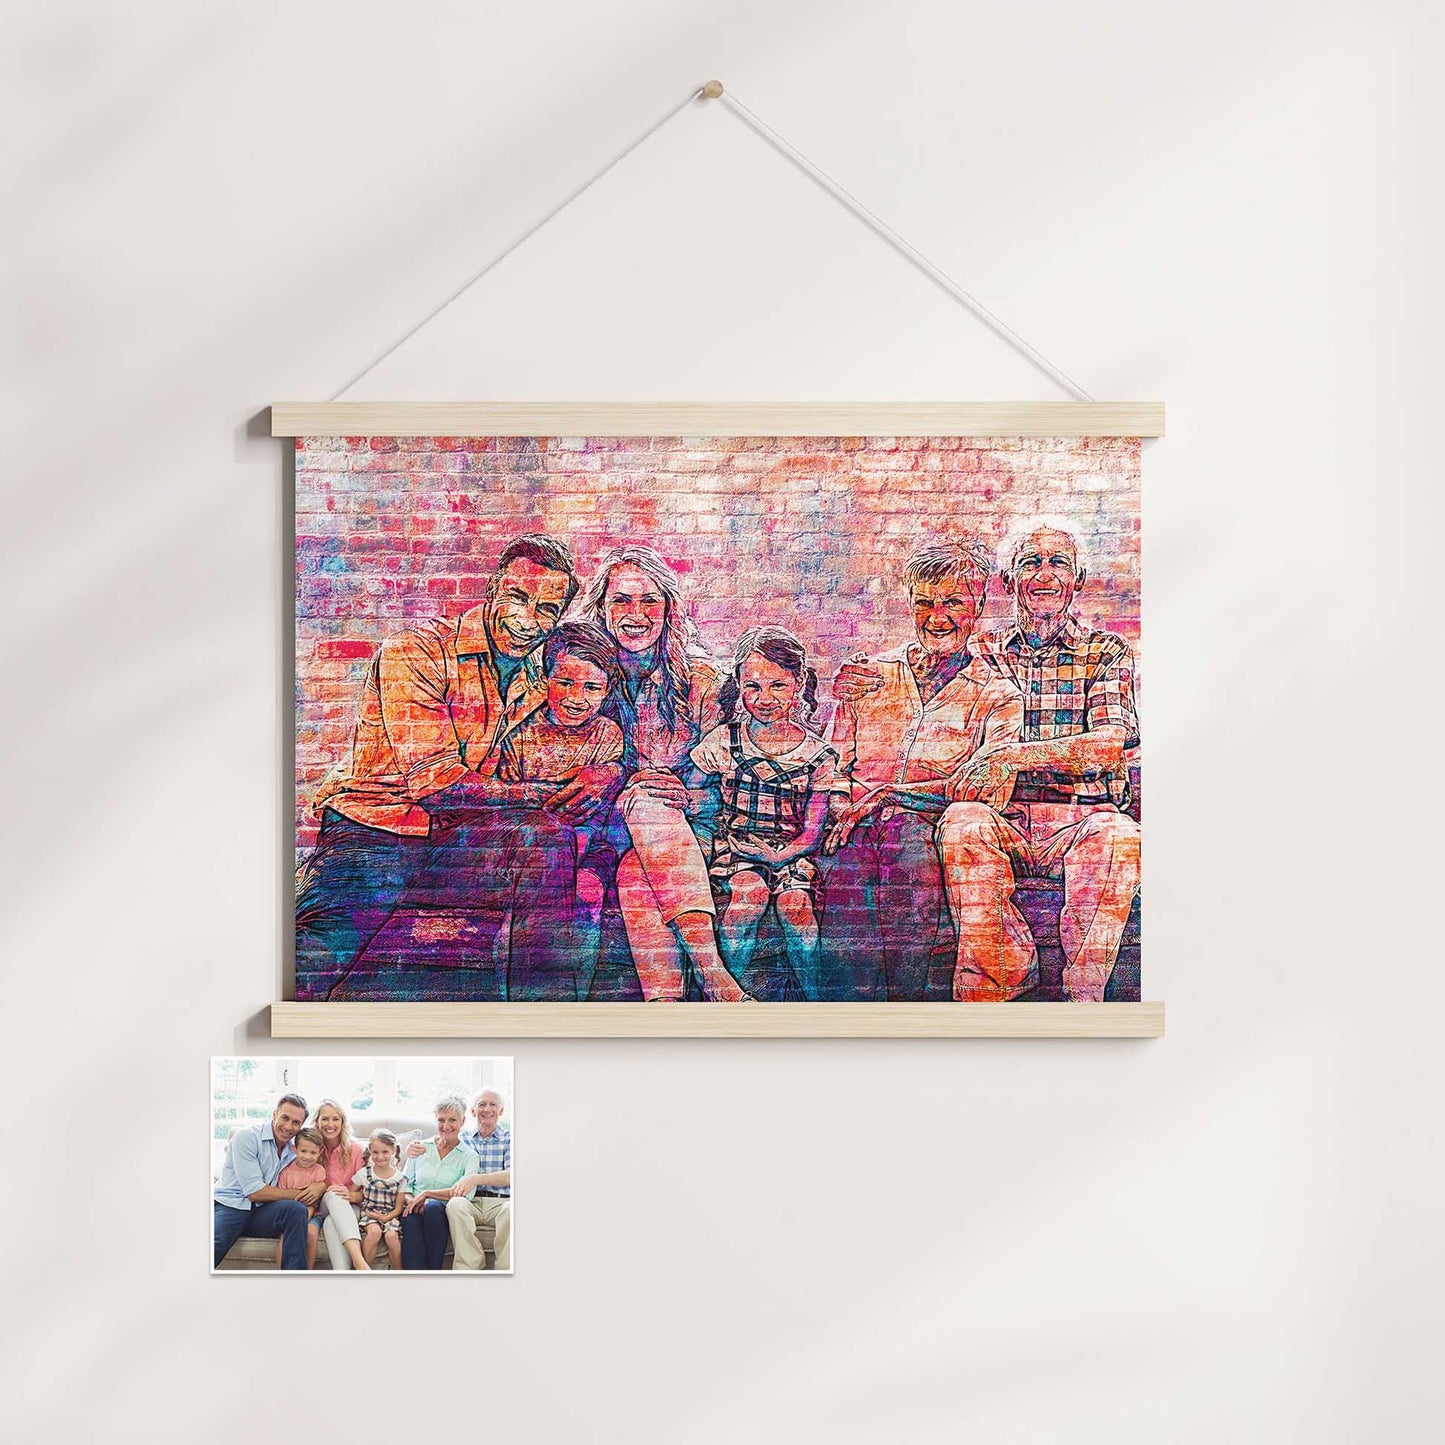 Elevate your interior design with our Personalised Brick Graffiti Street Art Poster Hanger. Its artistic appeal lies in the combination of the urban graffiti street art style and the realistic brick wall texture, creating a unique print